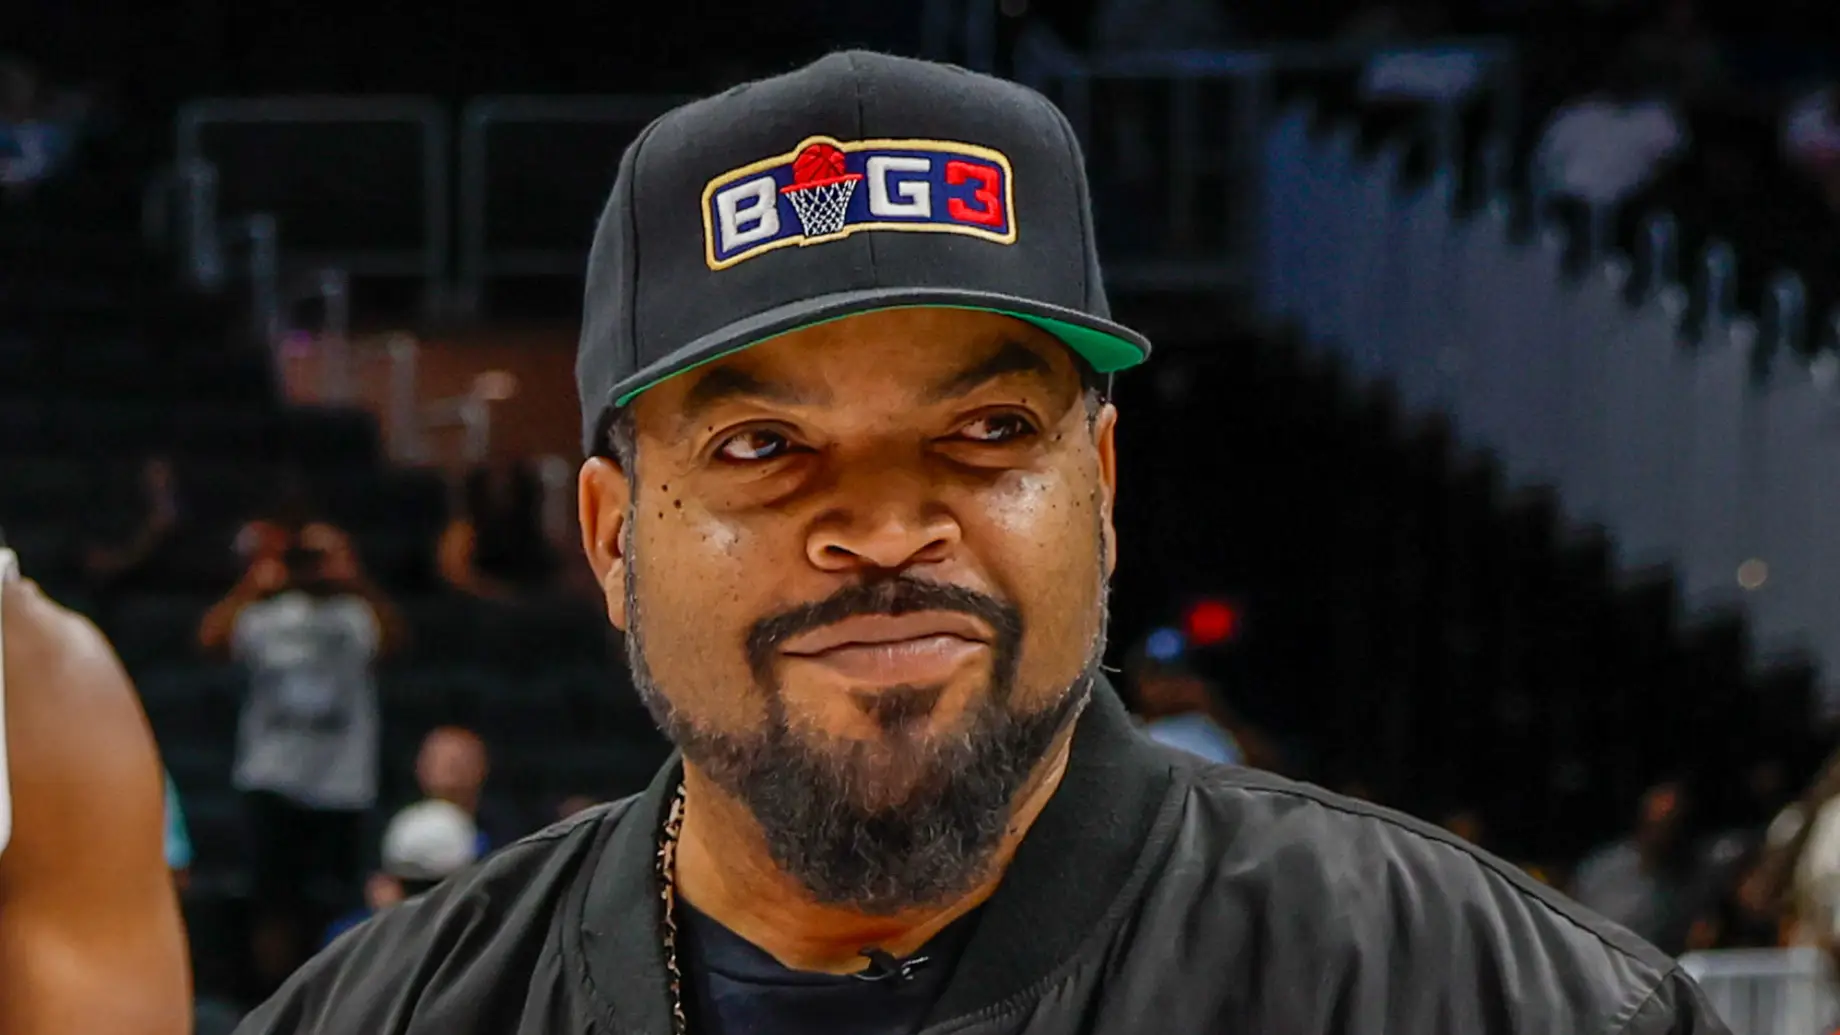 Ice Cube’s Big 3 League Sells Its First Basketball Team, Announces Major Changes